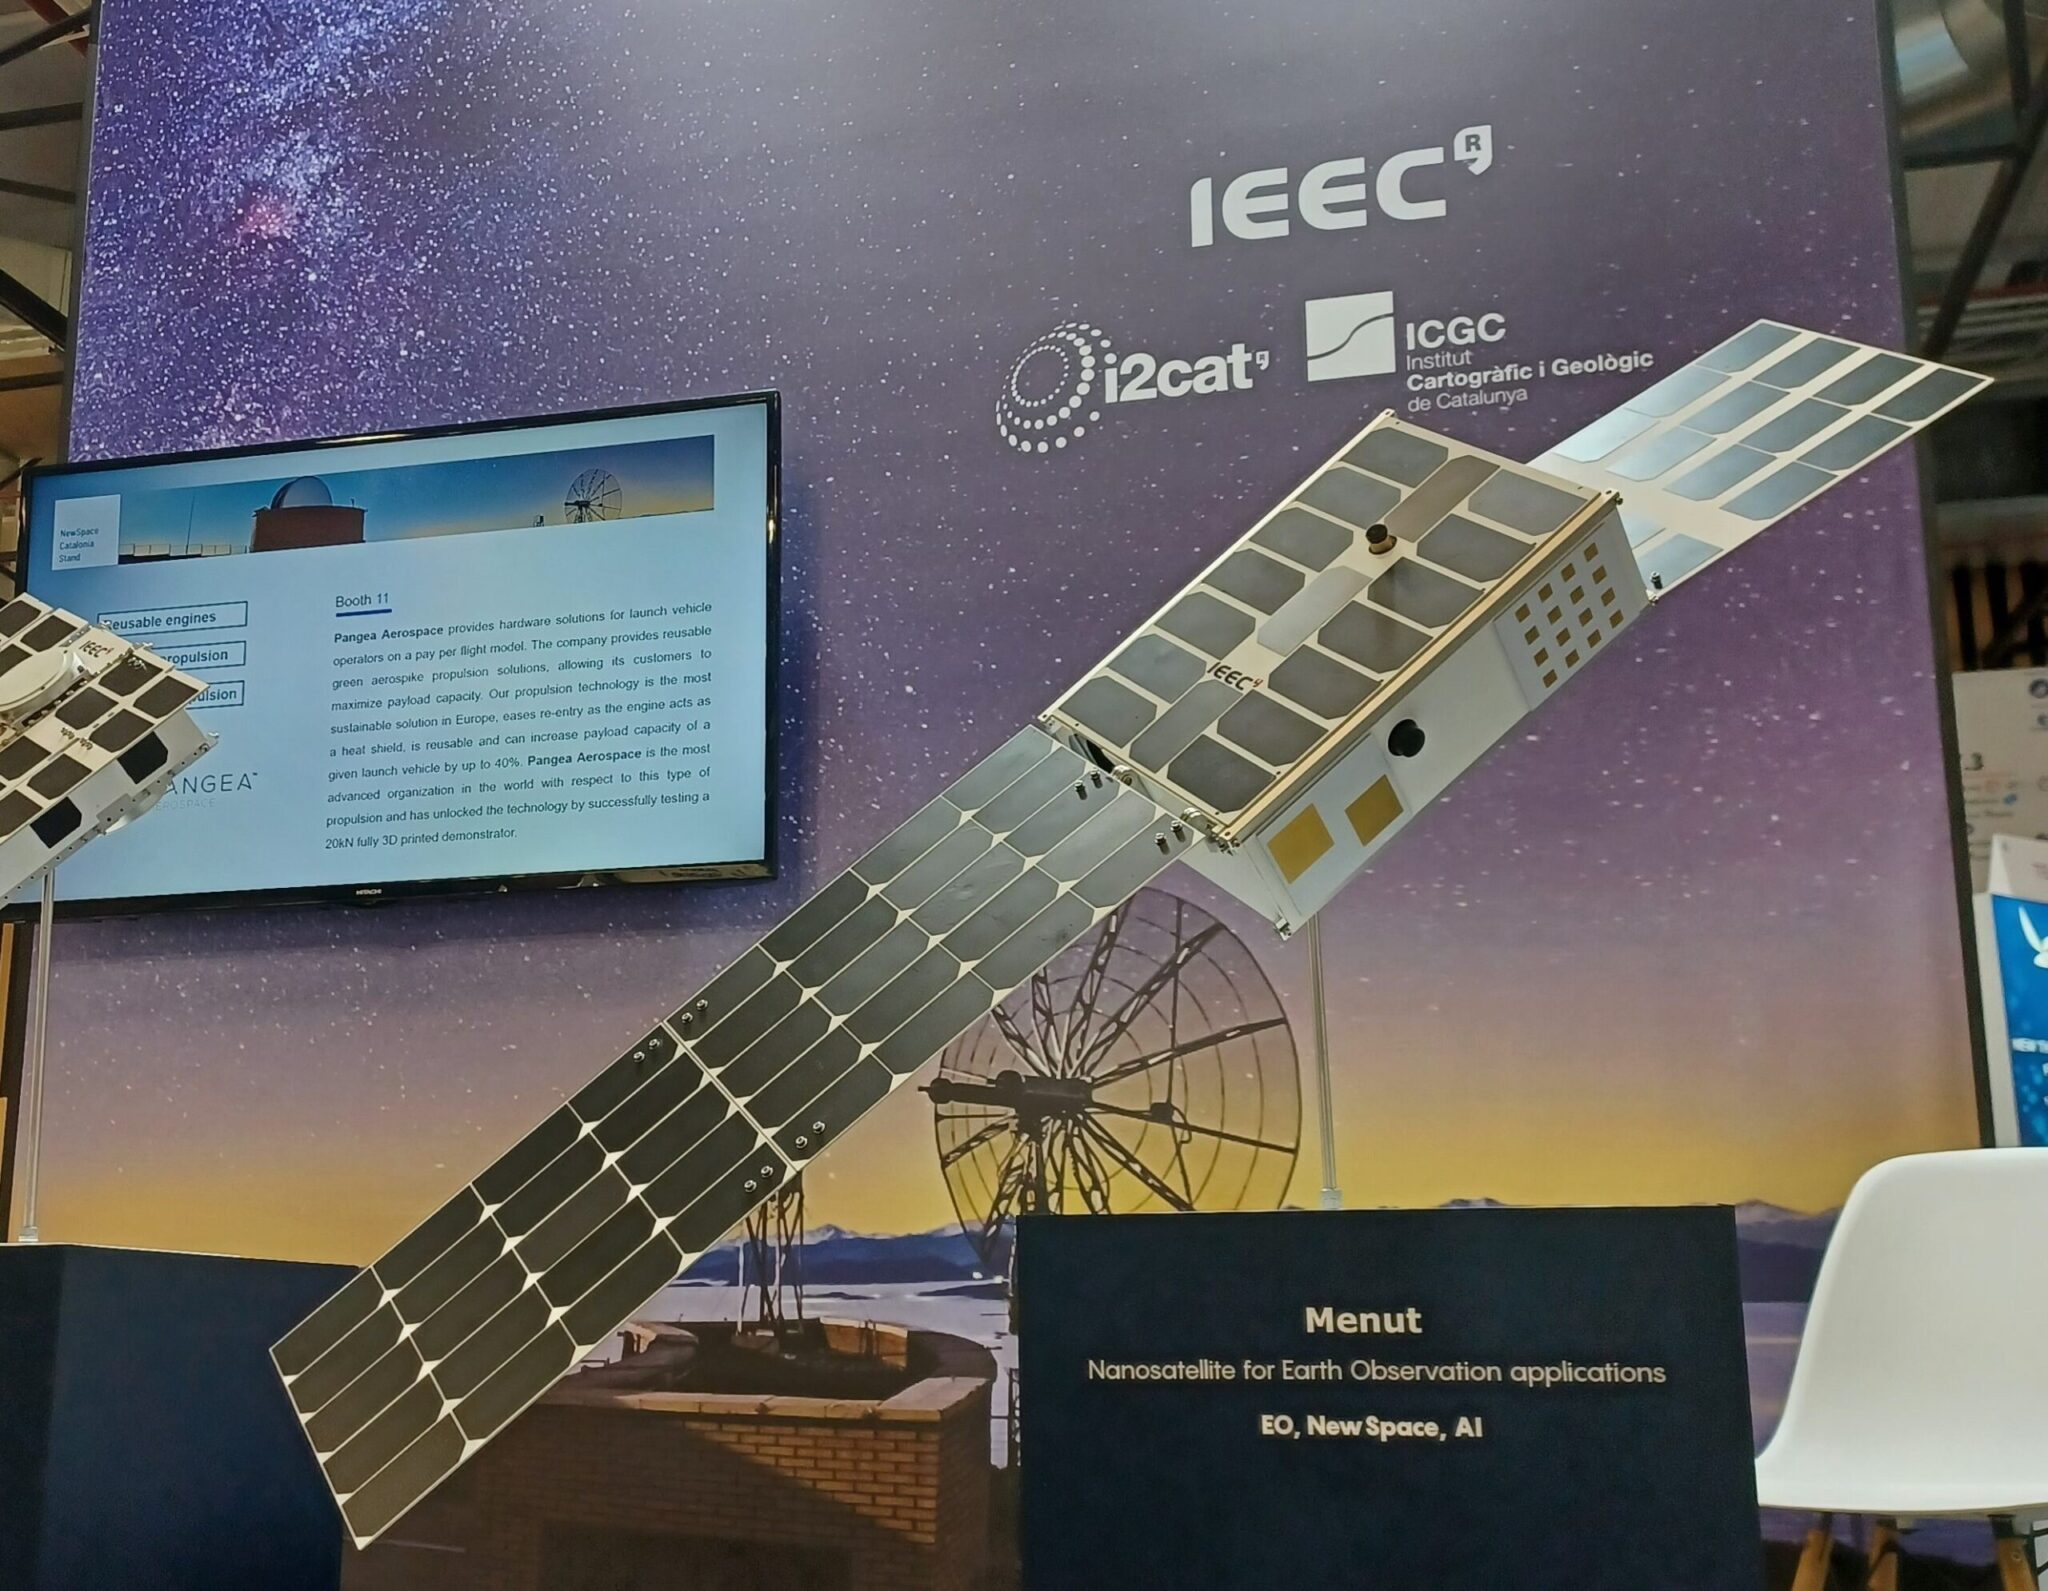 The nanosatellite 'Menut' will be part of the 'shared' OpenConstellation to face the challenges of the climate emergency